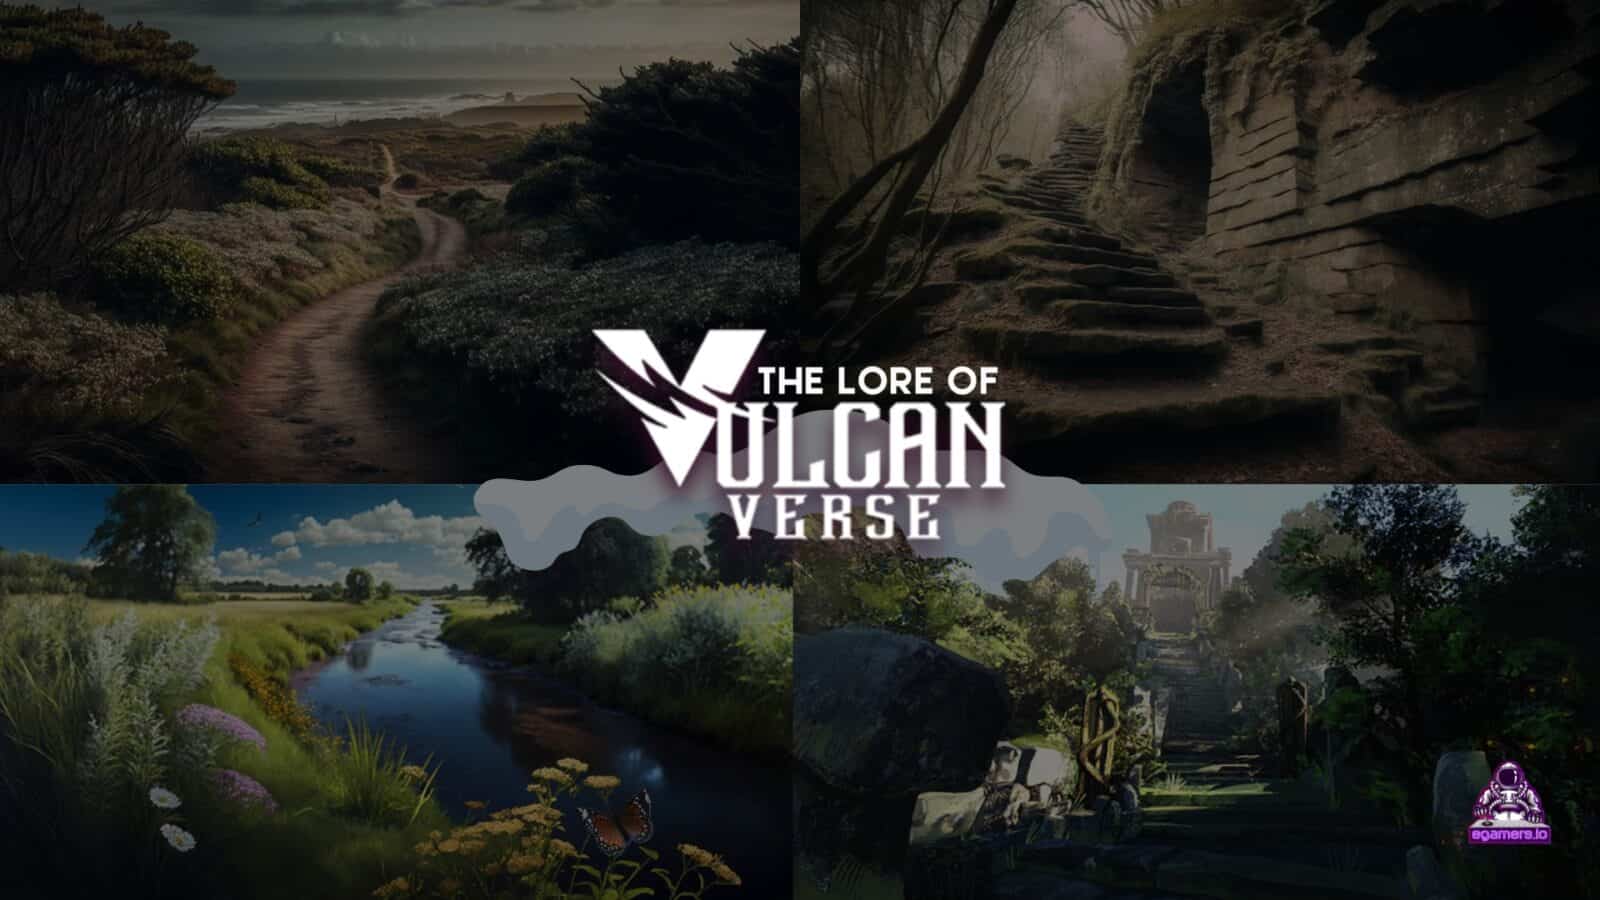 In this article, we are continuing the lore of VulcanVerse and the showcase of the Arcadia Gardens. We've talked about the Deep Forest, the Sacred Way, and the Summer Palace. Are you ready to travel north and experience the west bank of the Riven Ladon?